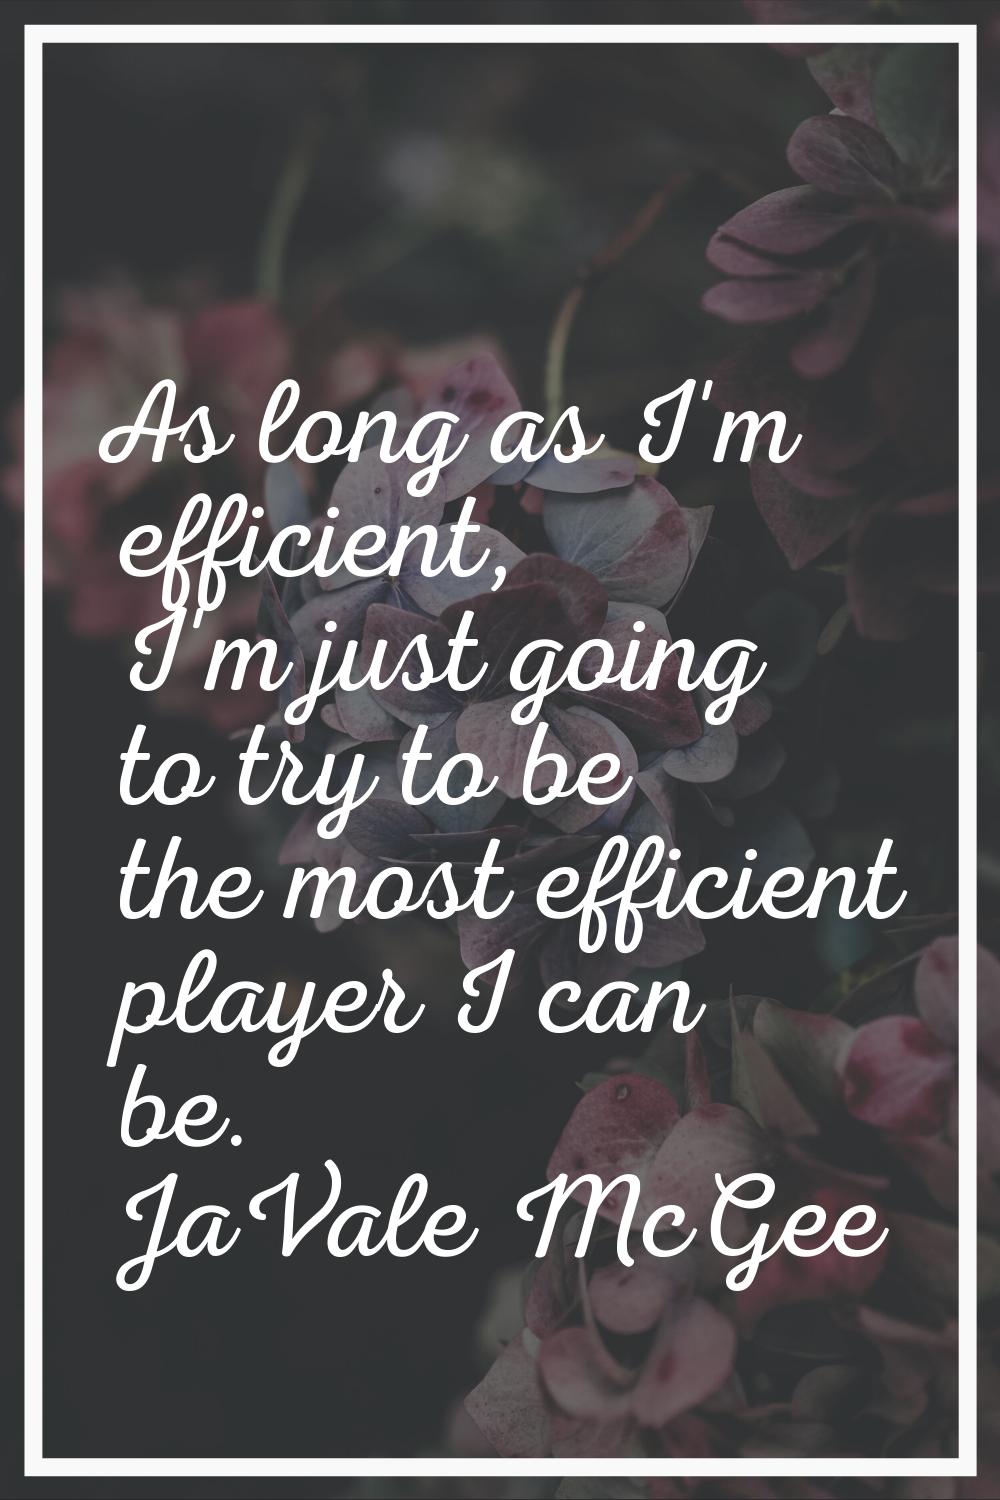 As long as I'm efficient, I'm just going to try to be the most efficient player I can be.